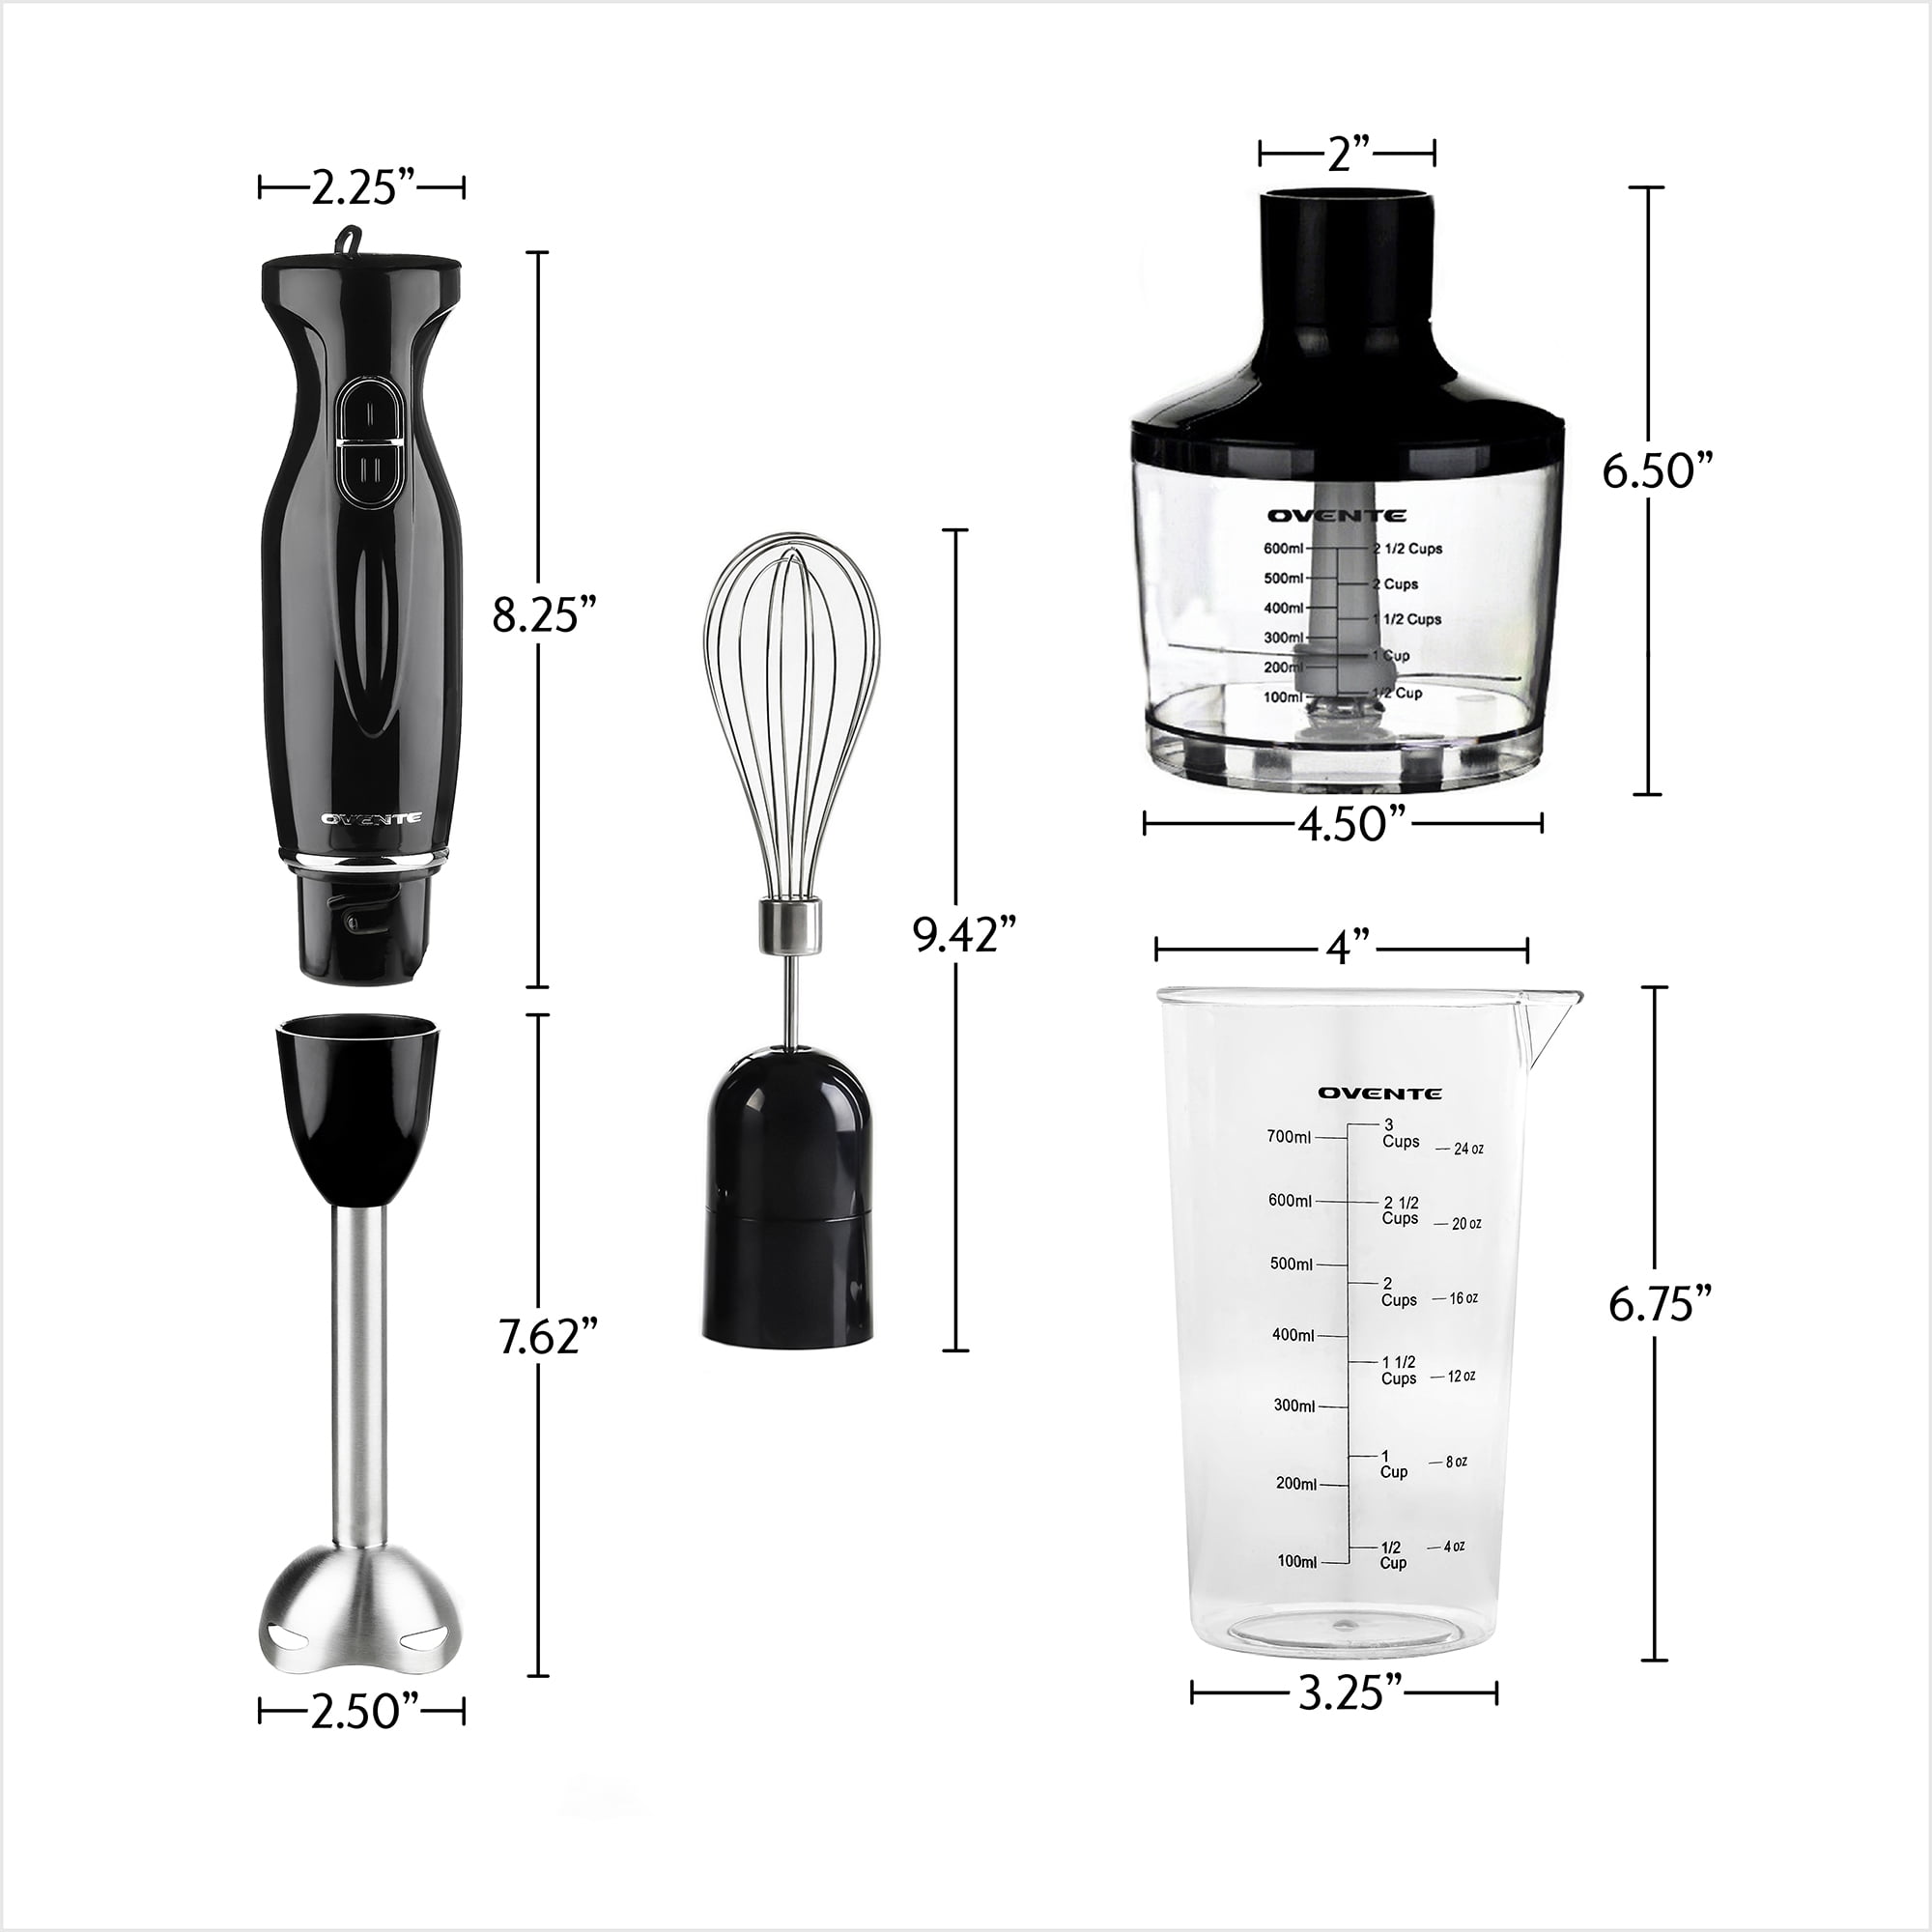 Ovente Immersion Electric Handheld Blender Set with Stainless Steel Blades,  500 Watt 6 Mix Speed Portable Stick Blender with Egg Whisk Attachment  Mixing Beaker & Food Processor/ Chopper, Black HS695B 